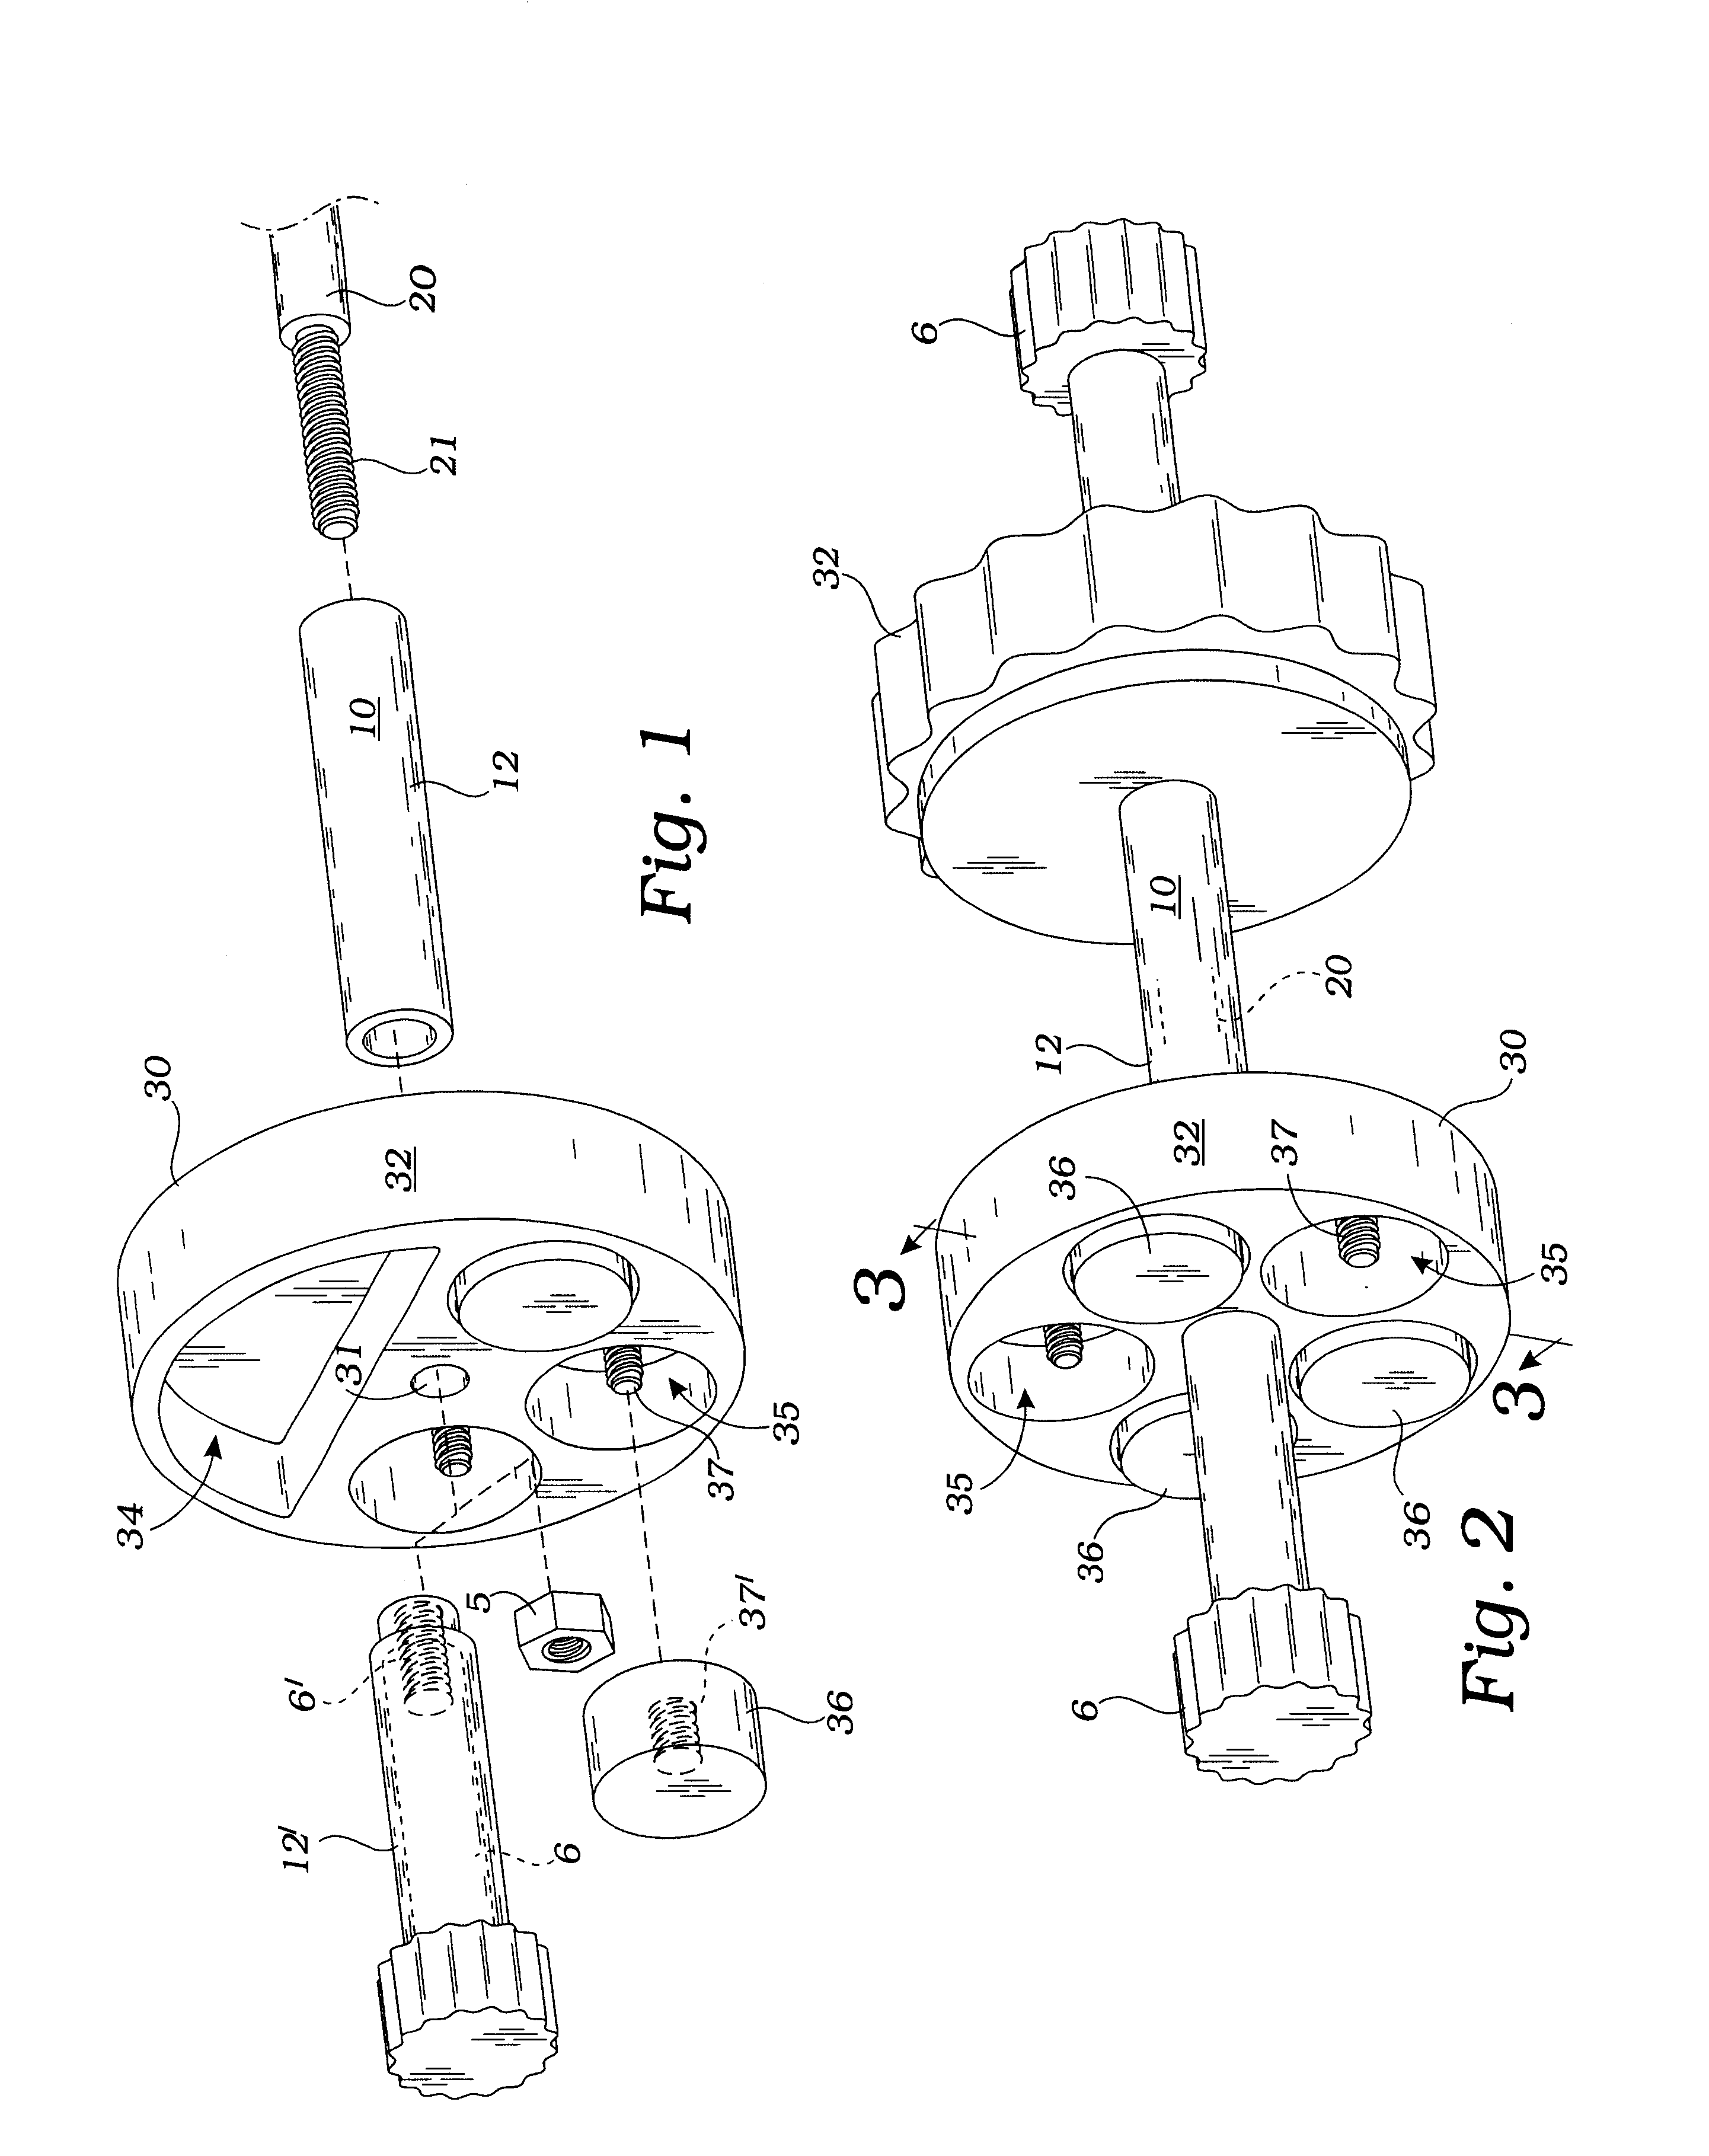 Specialty weight training apparatus and method